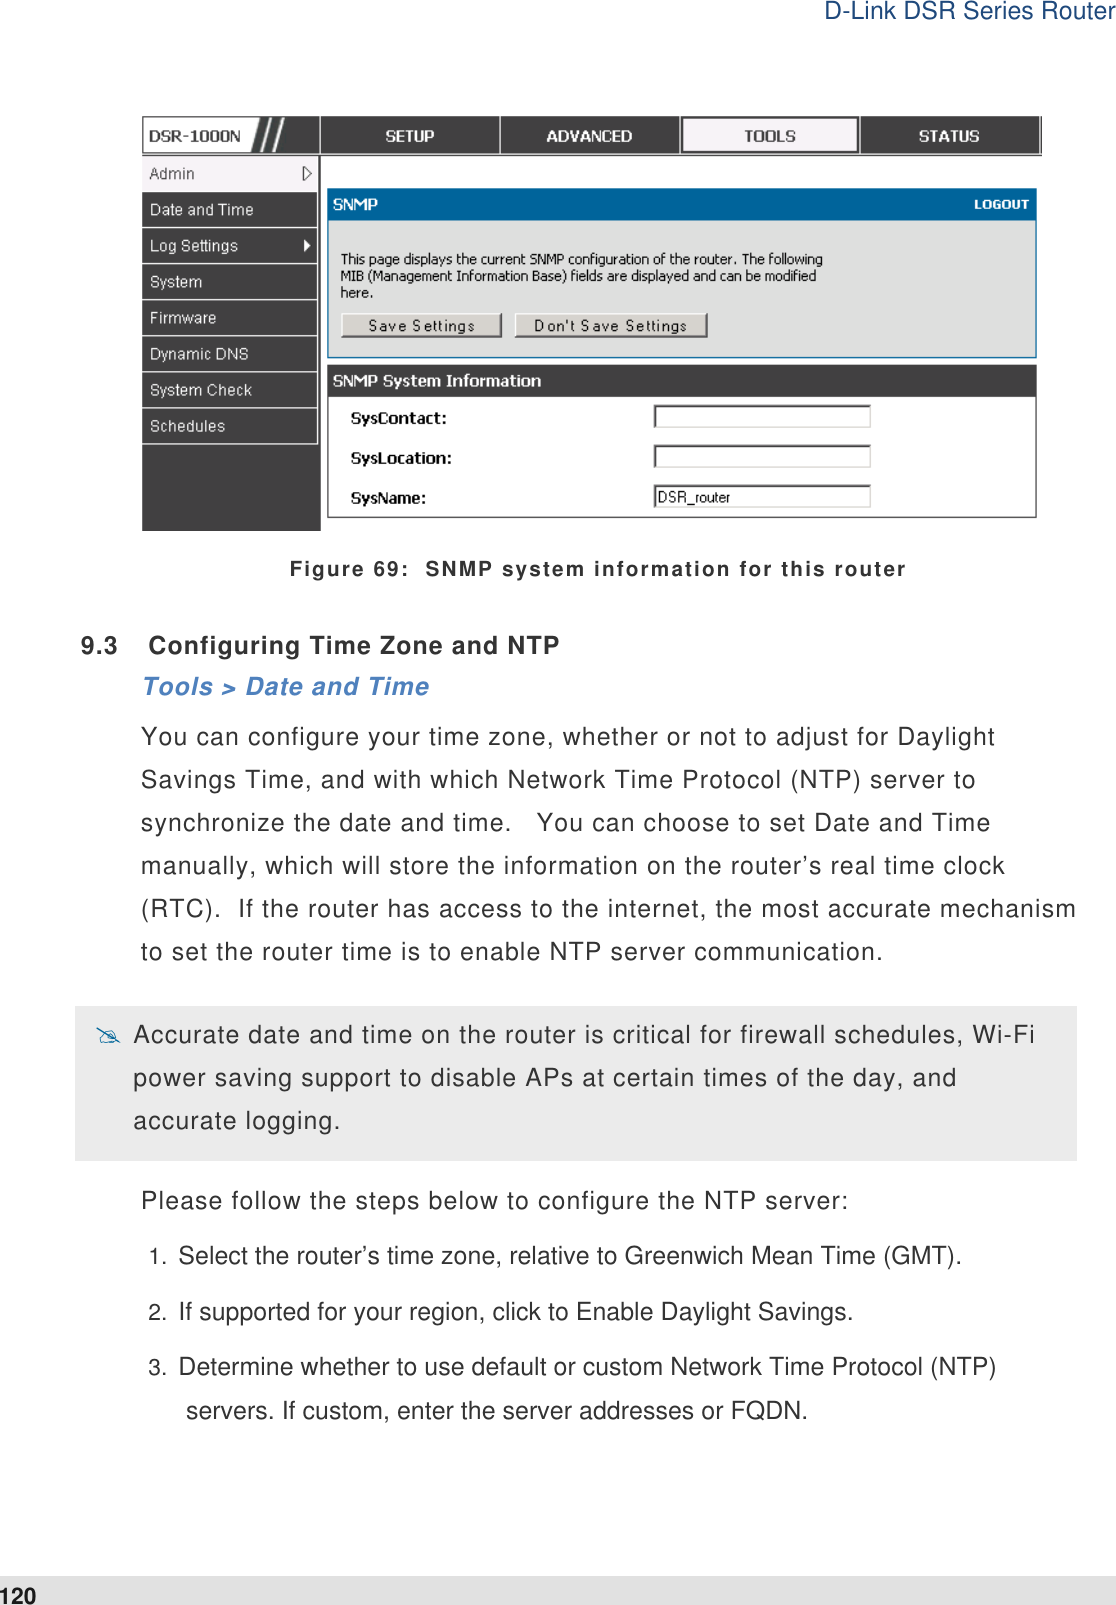 D-Link DSR Series Router 120  Figure 69:  SNMP system information for this router 9.3  Configuring Time Zone and NTP Tools &gt; Date and Time You can configure your time zone, whether or not to adjust for Daylight Savings Time, and with which Network Time Protocol (NTP) server to synchronize the date and time.   You can choose to set Date and Time manually, which will store the information on the router’s real time clock (RTC).  If the router has access to the internet, the most accurate mechanism to set the router time is to enable NTP server communication.    Accurate date and time on the router is critical for firewall schedules, Wi-Fi power saving support to disable APs at certain times of the day, and accurate logging.   Please follow the steps below to configure the NTP server: 1.  Select the router’s time zone, relative to Greenwich Mean Time (GMT). 2.  If supported for your region, click to Enable Daylight Savings. 3.  Determine whether to use default or custom Network Time Protocol (NTP) servers. If custom, enter the server addresses or FQDN. 